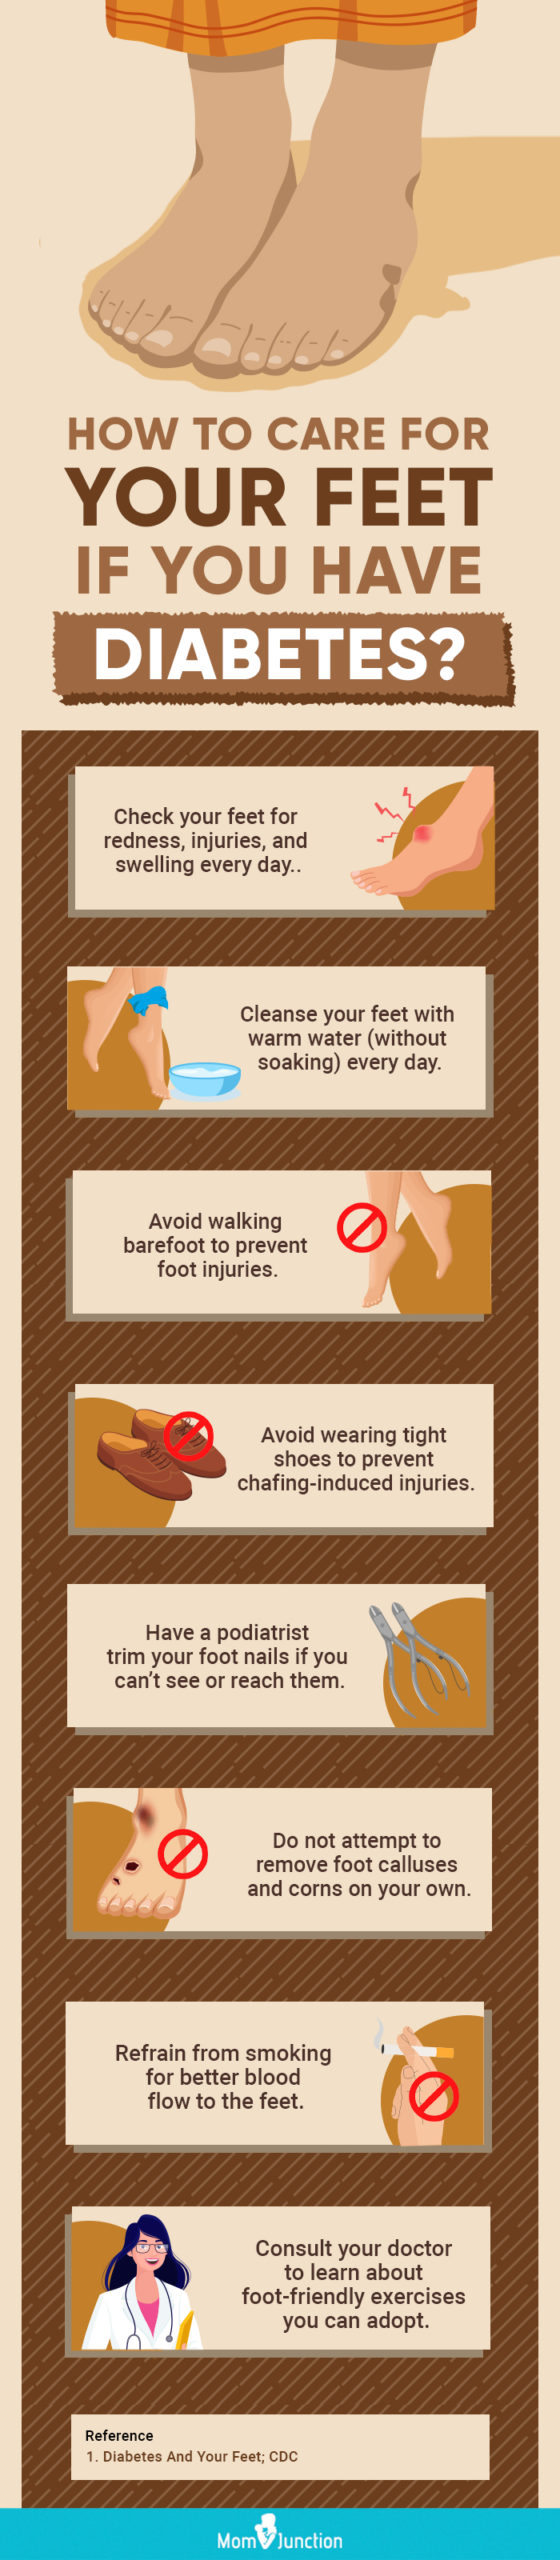 How To Care For Your Feet If You Have Diabetes? (infographic)